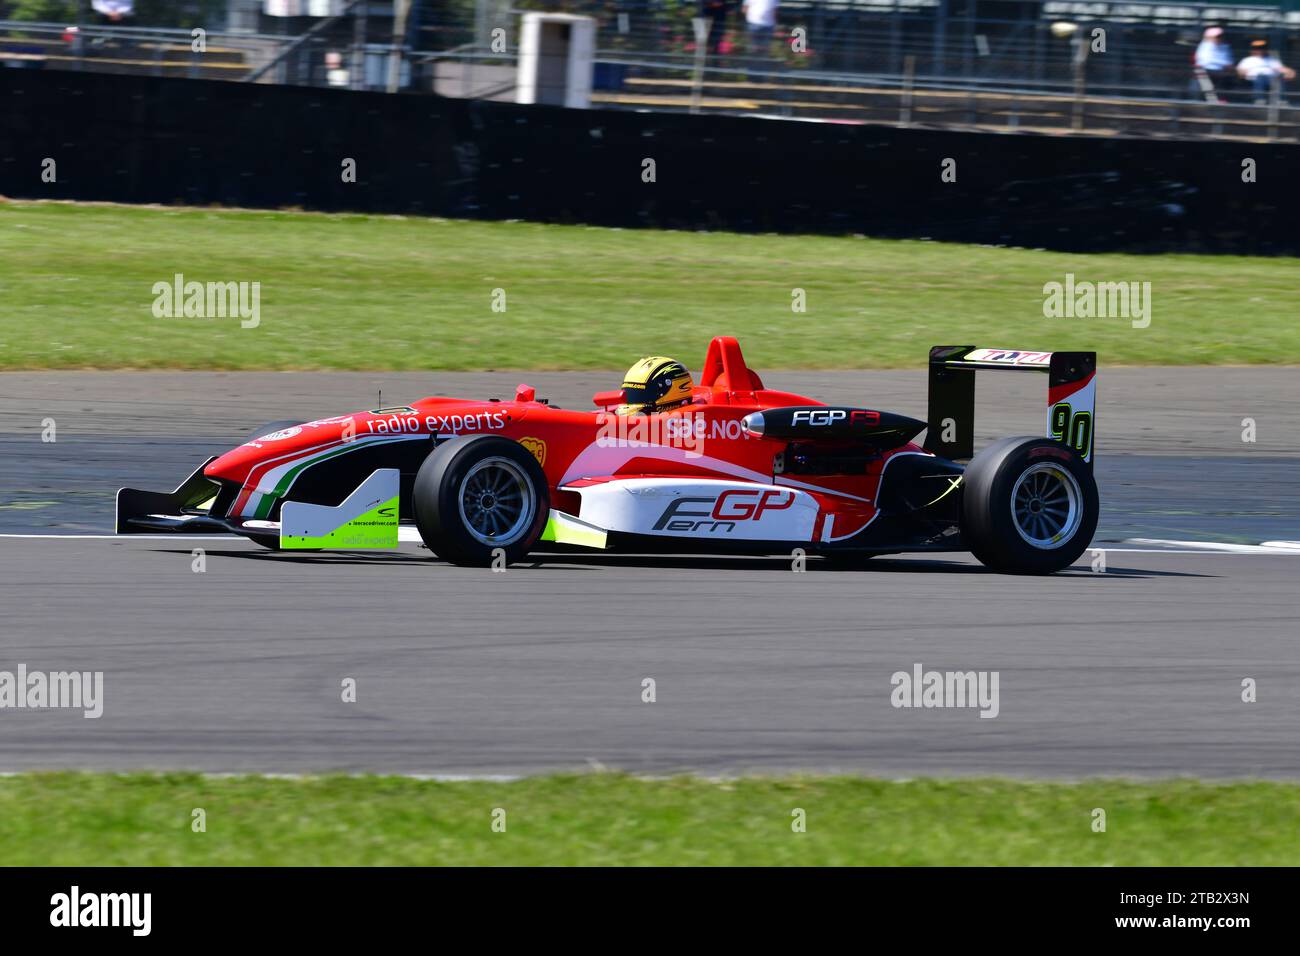 Lee Cunningham, Dallara F301, Monoposto Championship, Monoposto Racing Club, fifteen minutes of racing after a fifteen minute qualifying session, feat Stock Photo